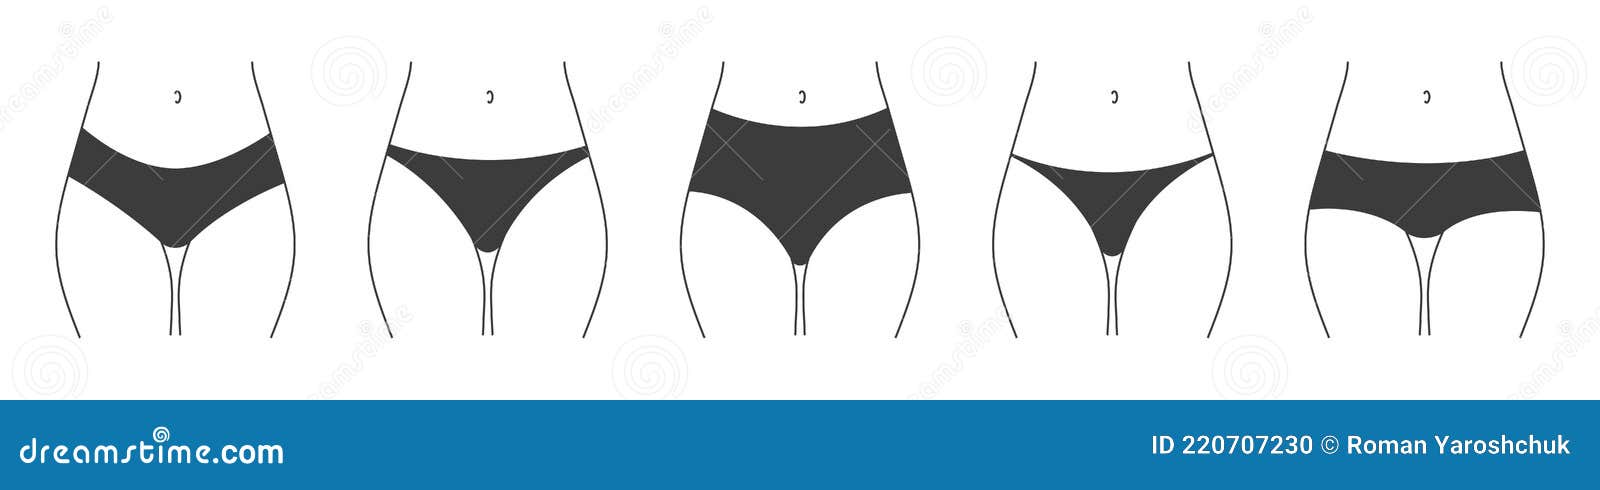 Different Types of Panties. Collection of Lingerie Stock Vector